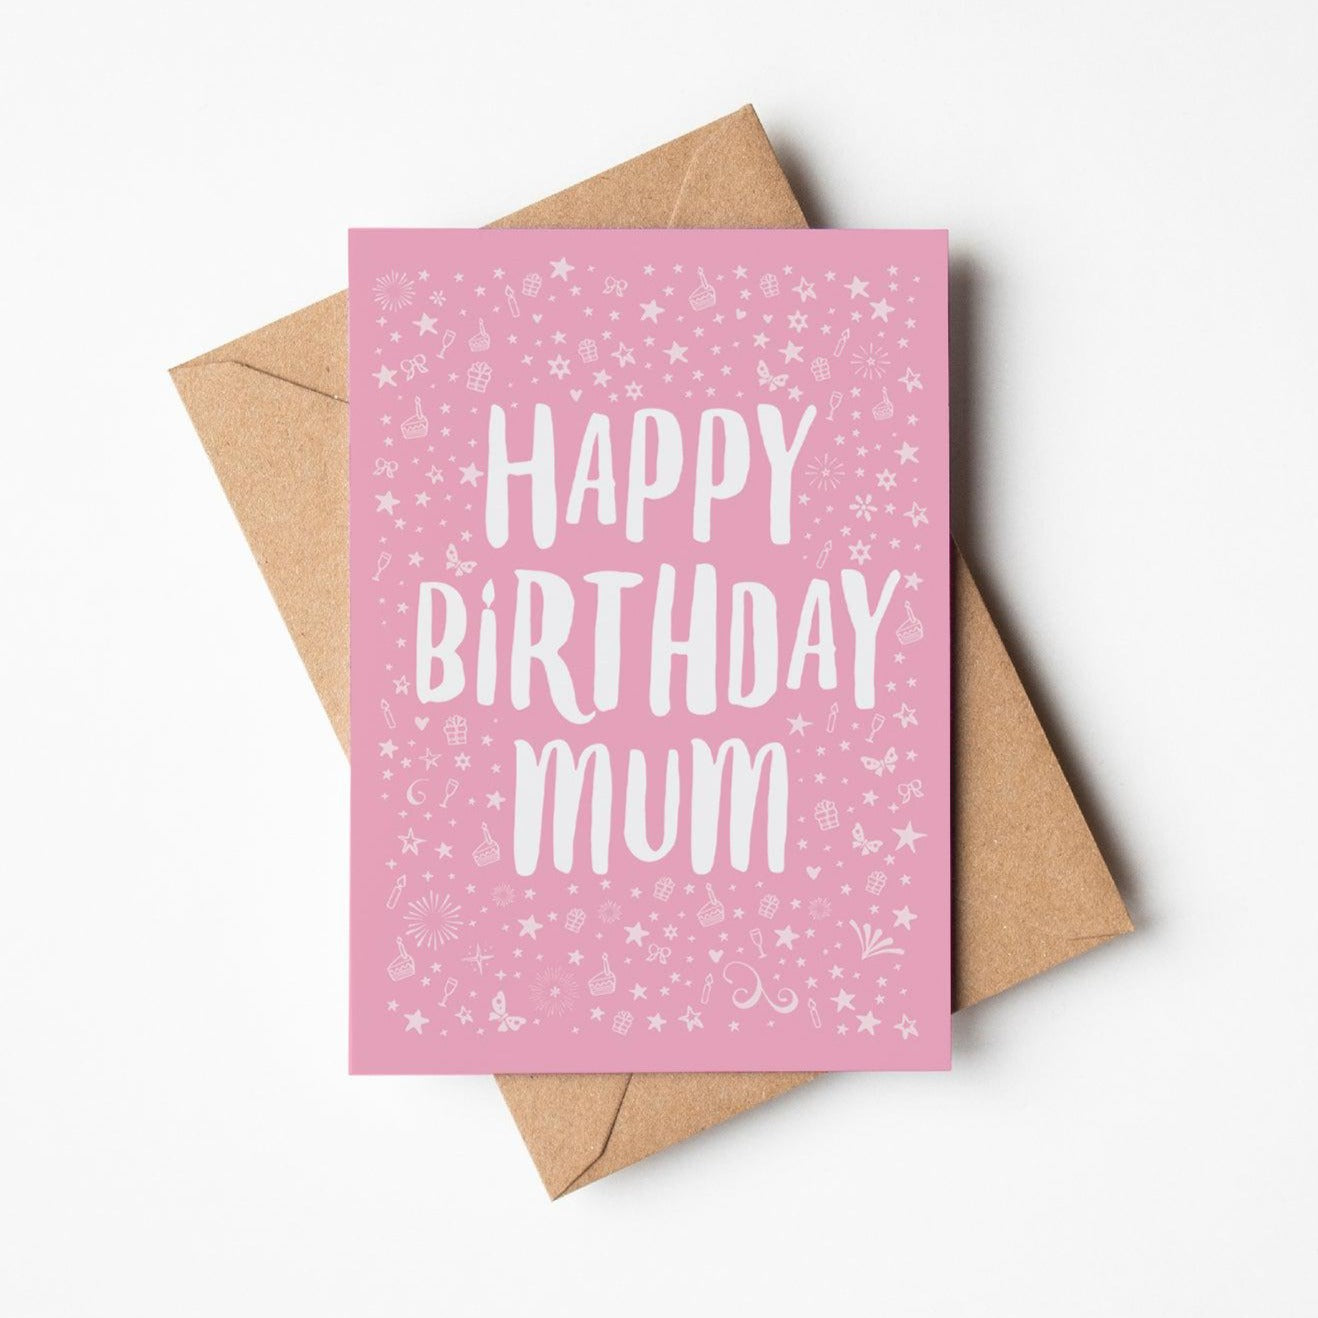 Personalised Happy Birthday Card in pink